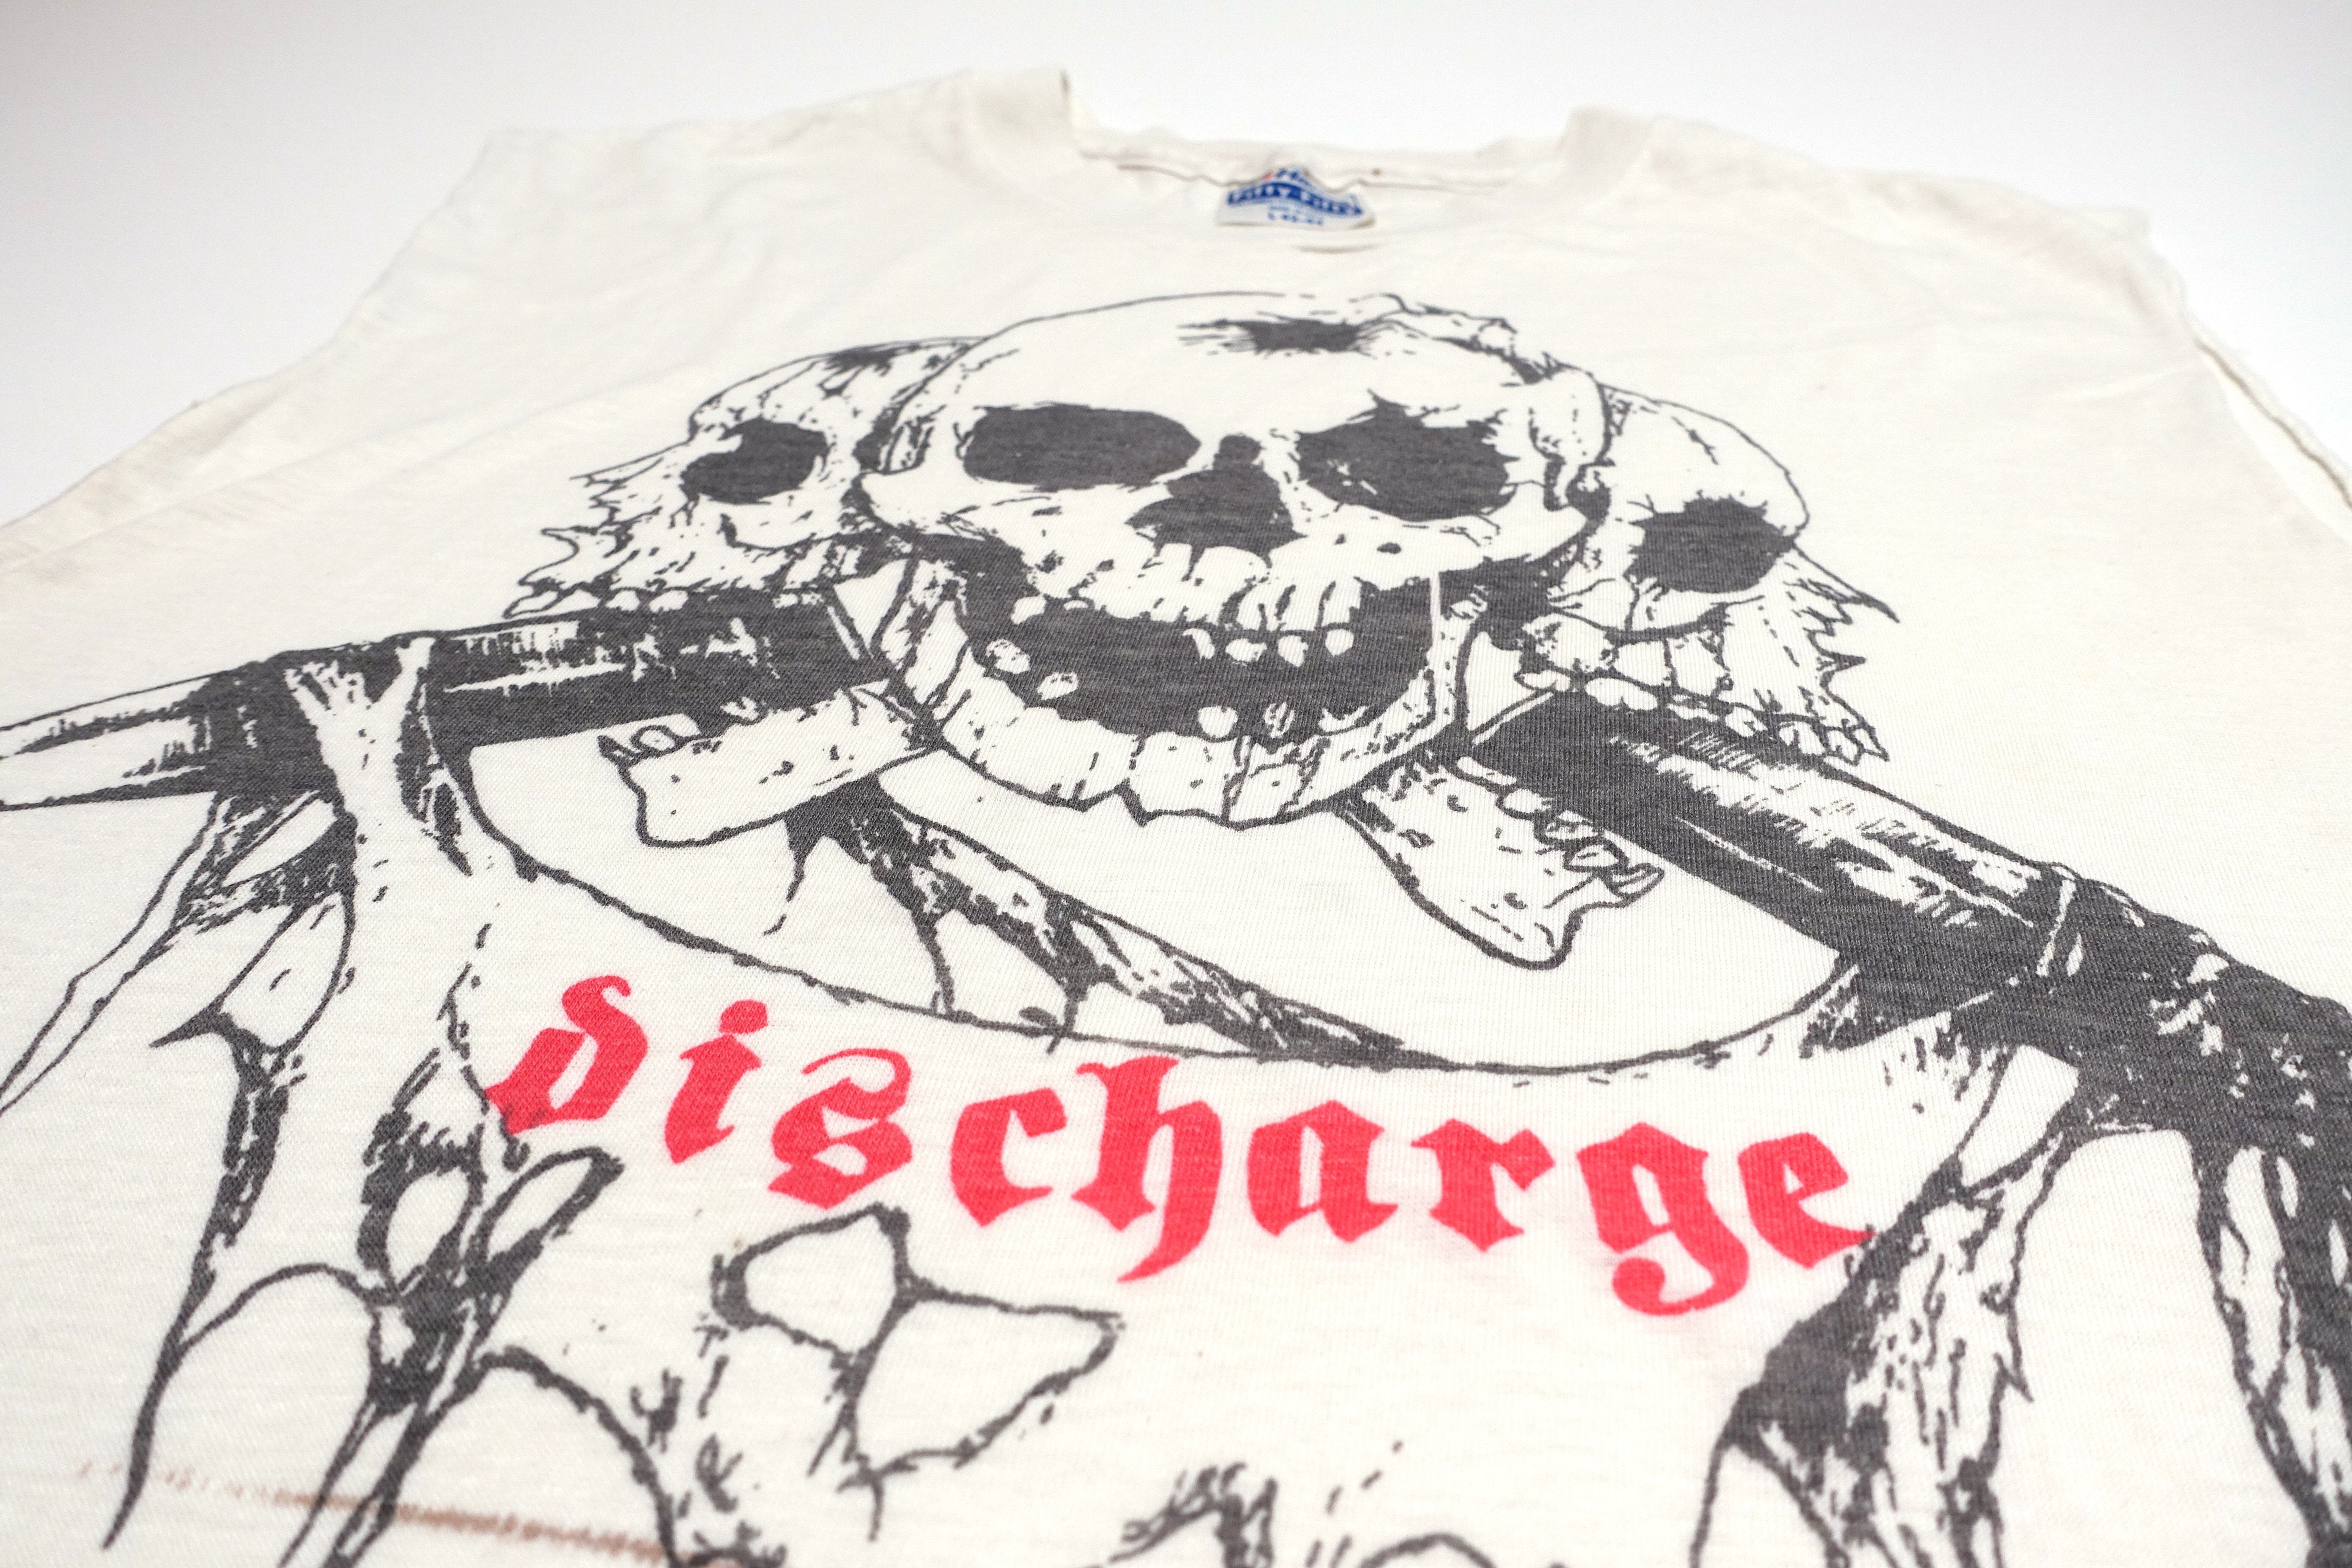 Discharge ‎– The Price Of Silence / Born To Die In The Gutter 1983 Tour Shirt Size Large